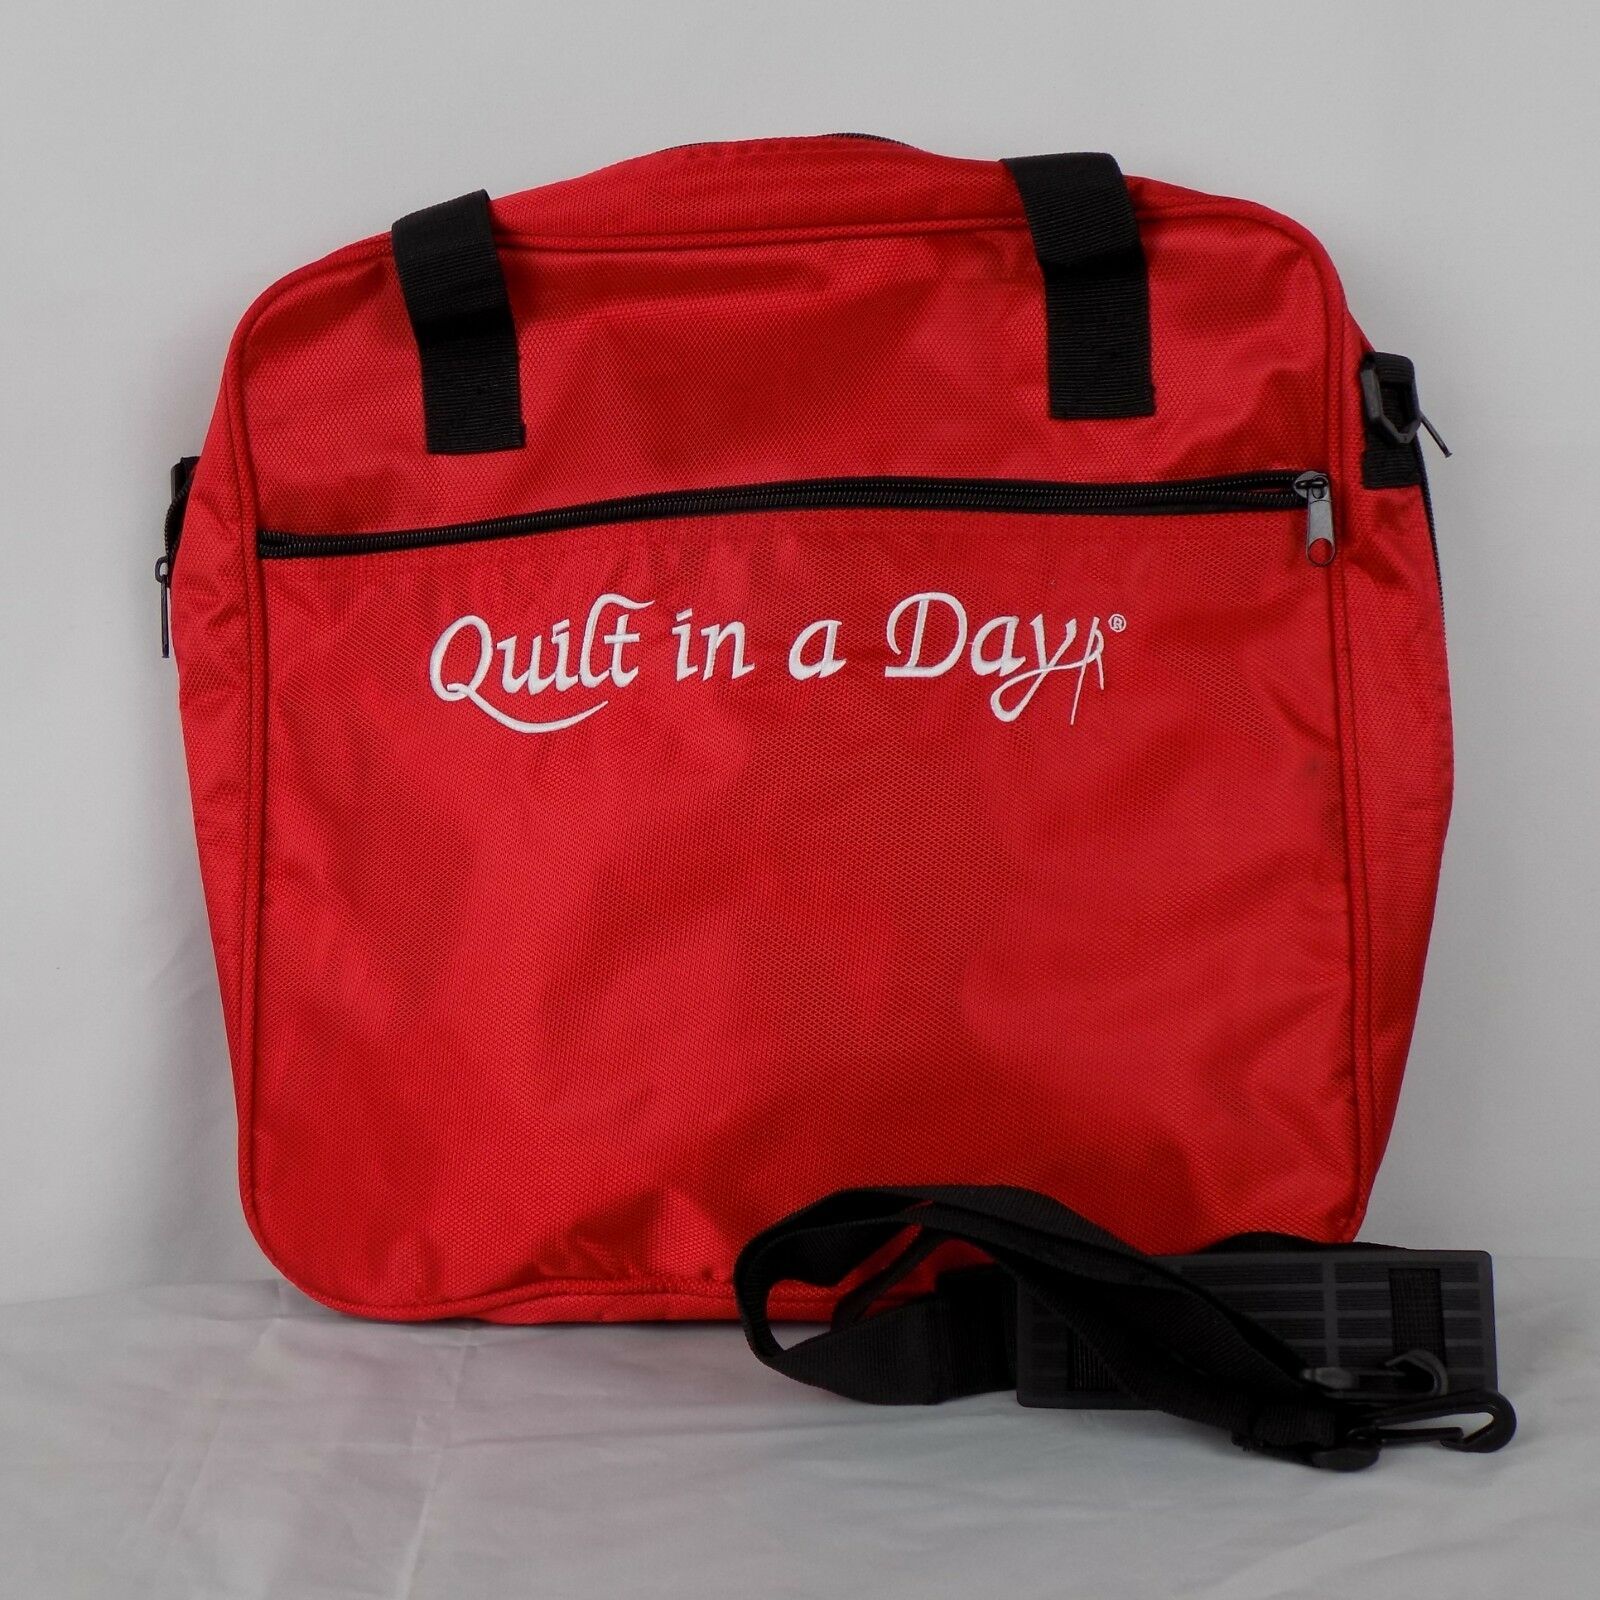 Quilt In A Day Bag Red Nylon Zip Close Shoulder Strap 14" Wide 13" High 3" Deep - $14.52